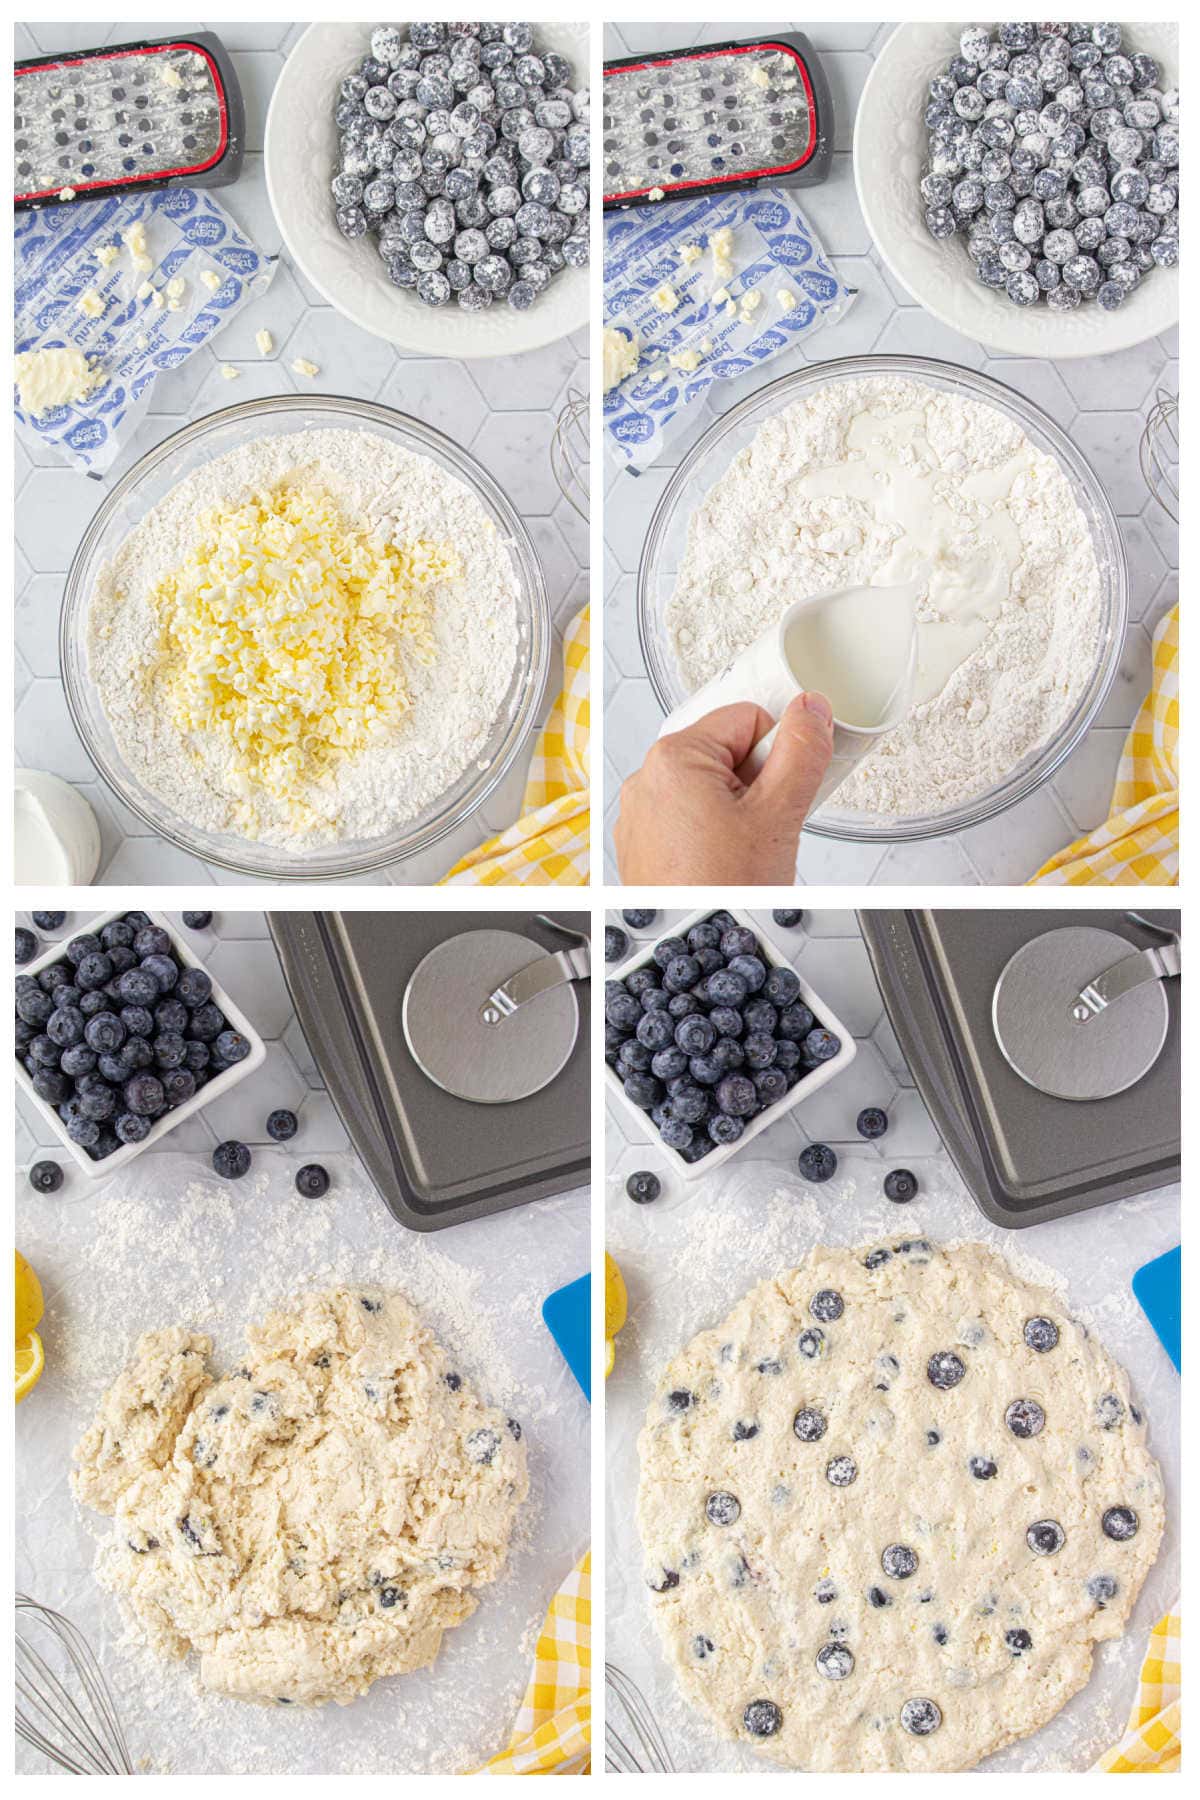 Step by step images showing how to make these scones.